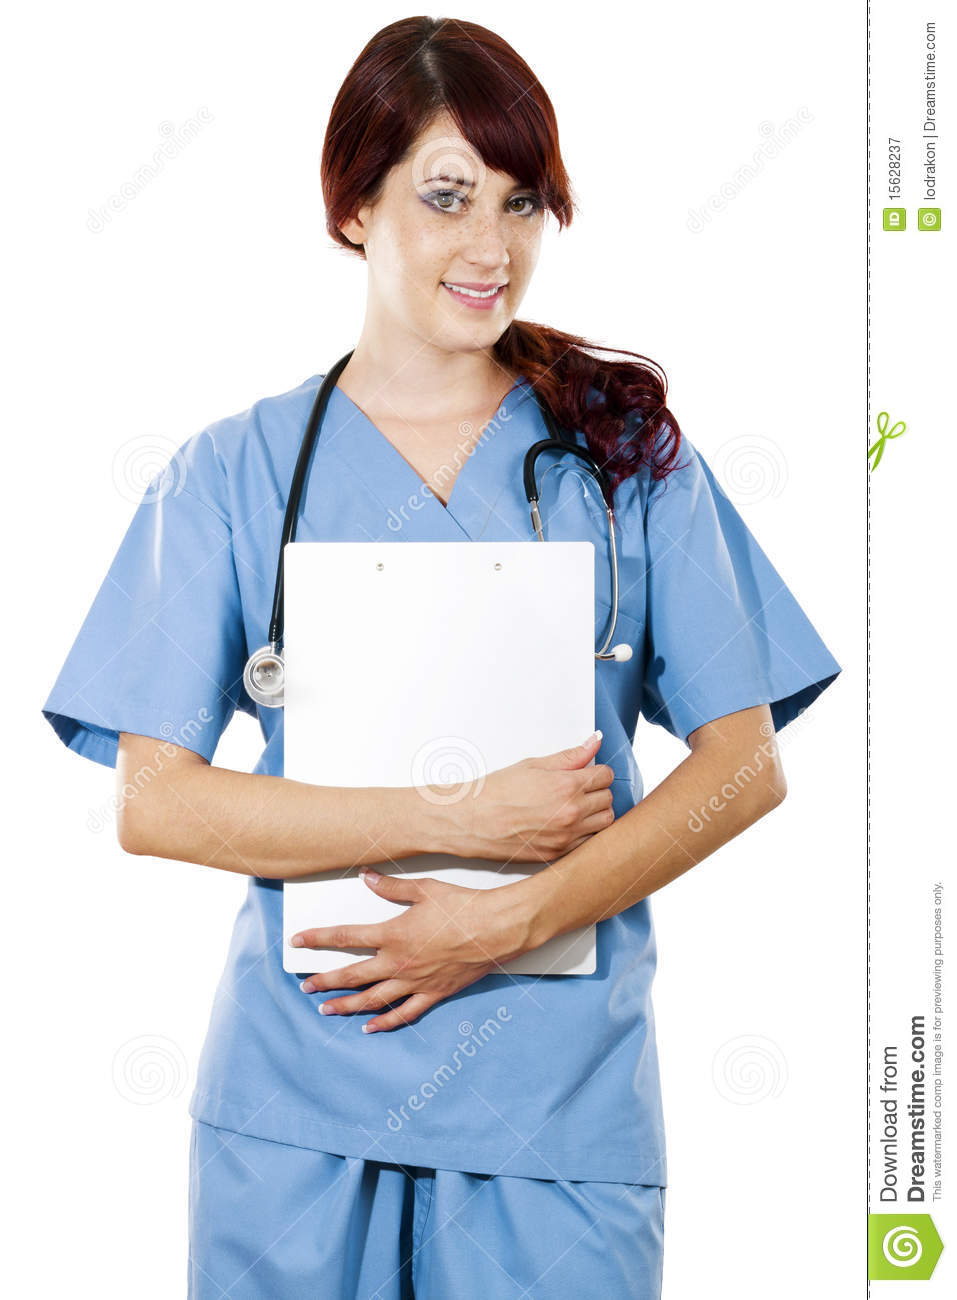 Female Health Care Worker Royalty Free Stock Photography   Image